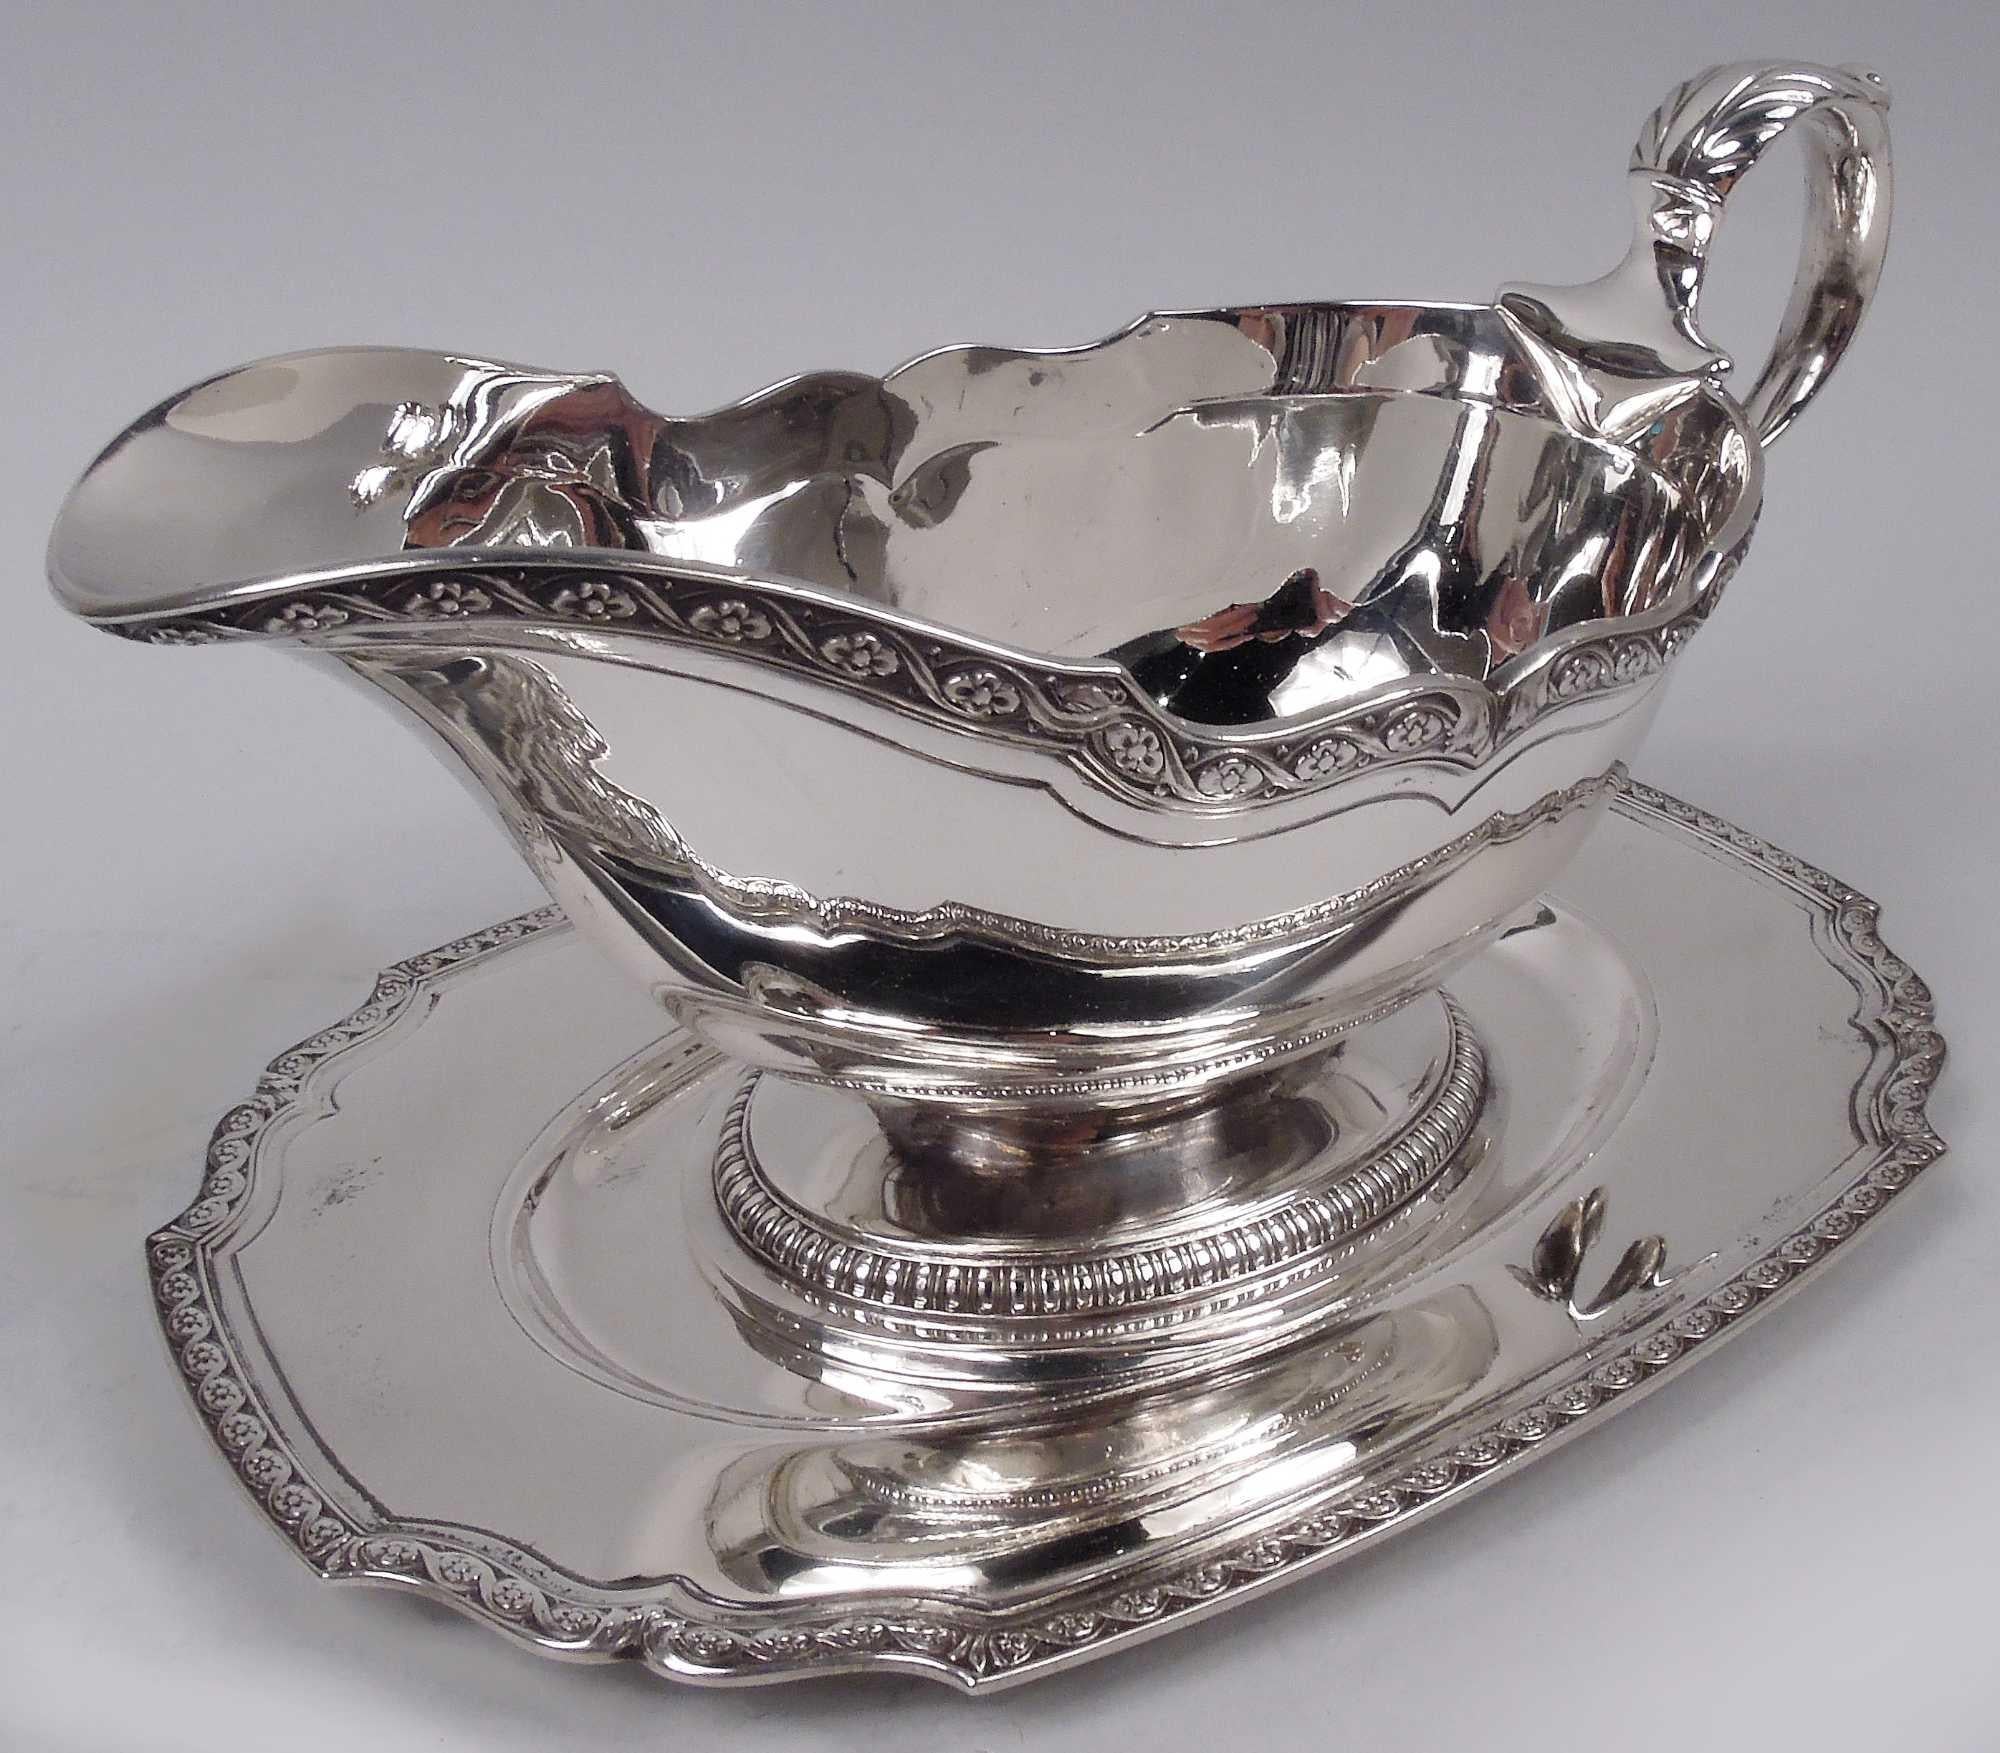 Edwardian Classical sterling silver gravy boat on stand. Made by Tiffany & Co. in New York, ca 1924. Boat: Ovoid bowl with scrolled helmet mouth, and leaf-capped high-looping double-scroll handle; raised foot. Stand: Rectilinear with scrolled